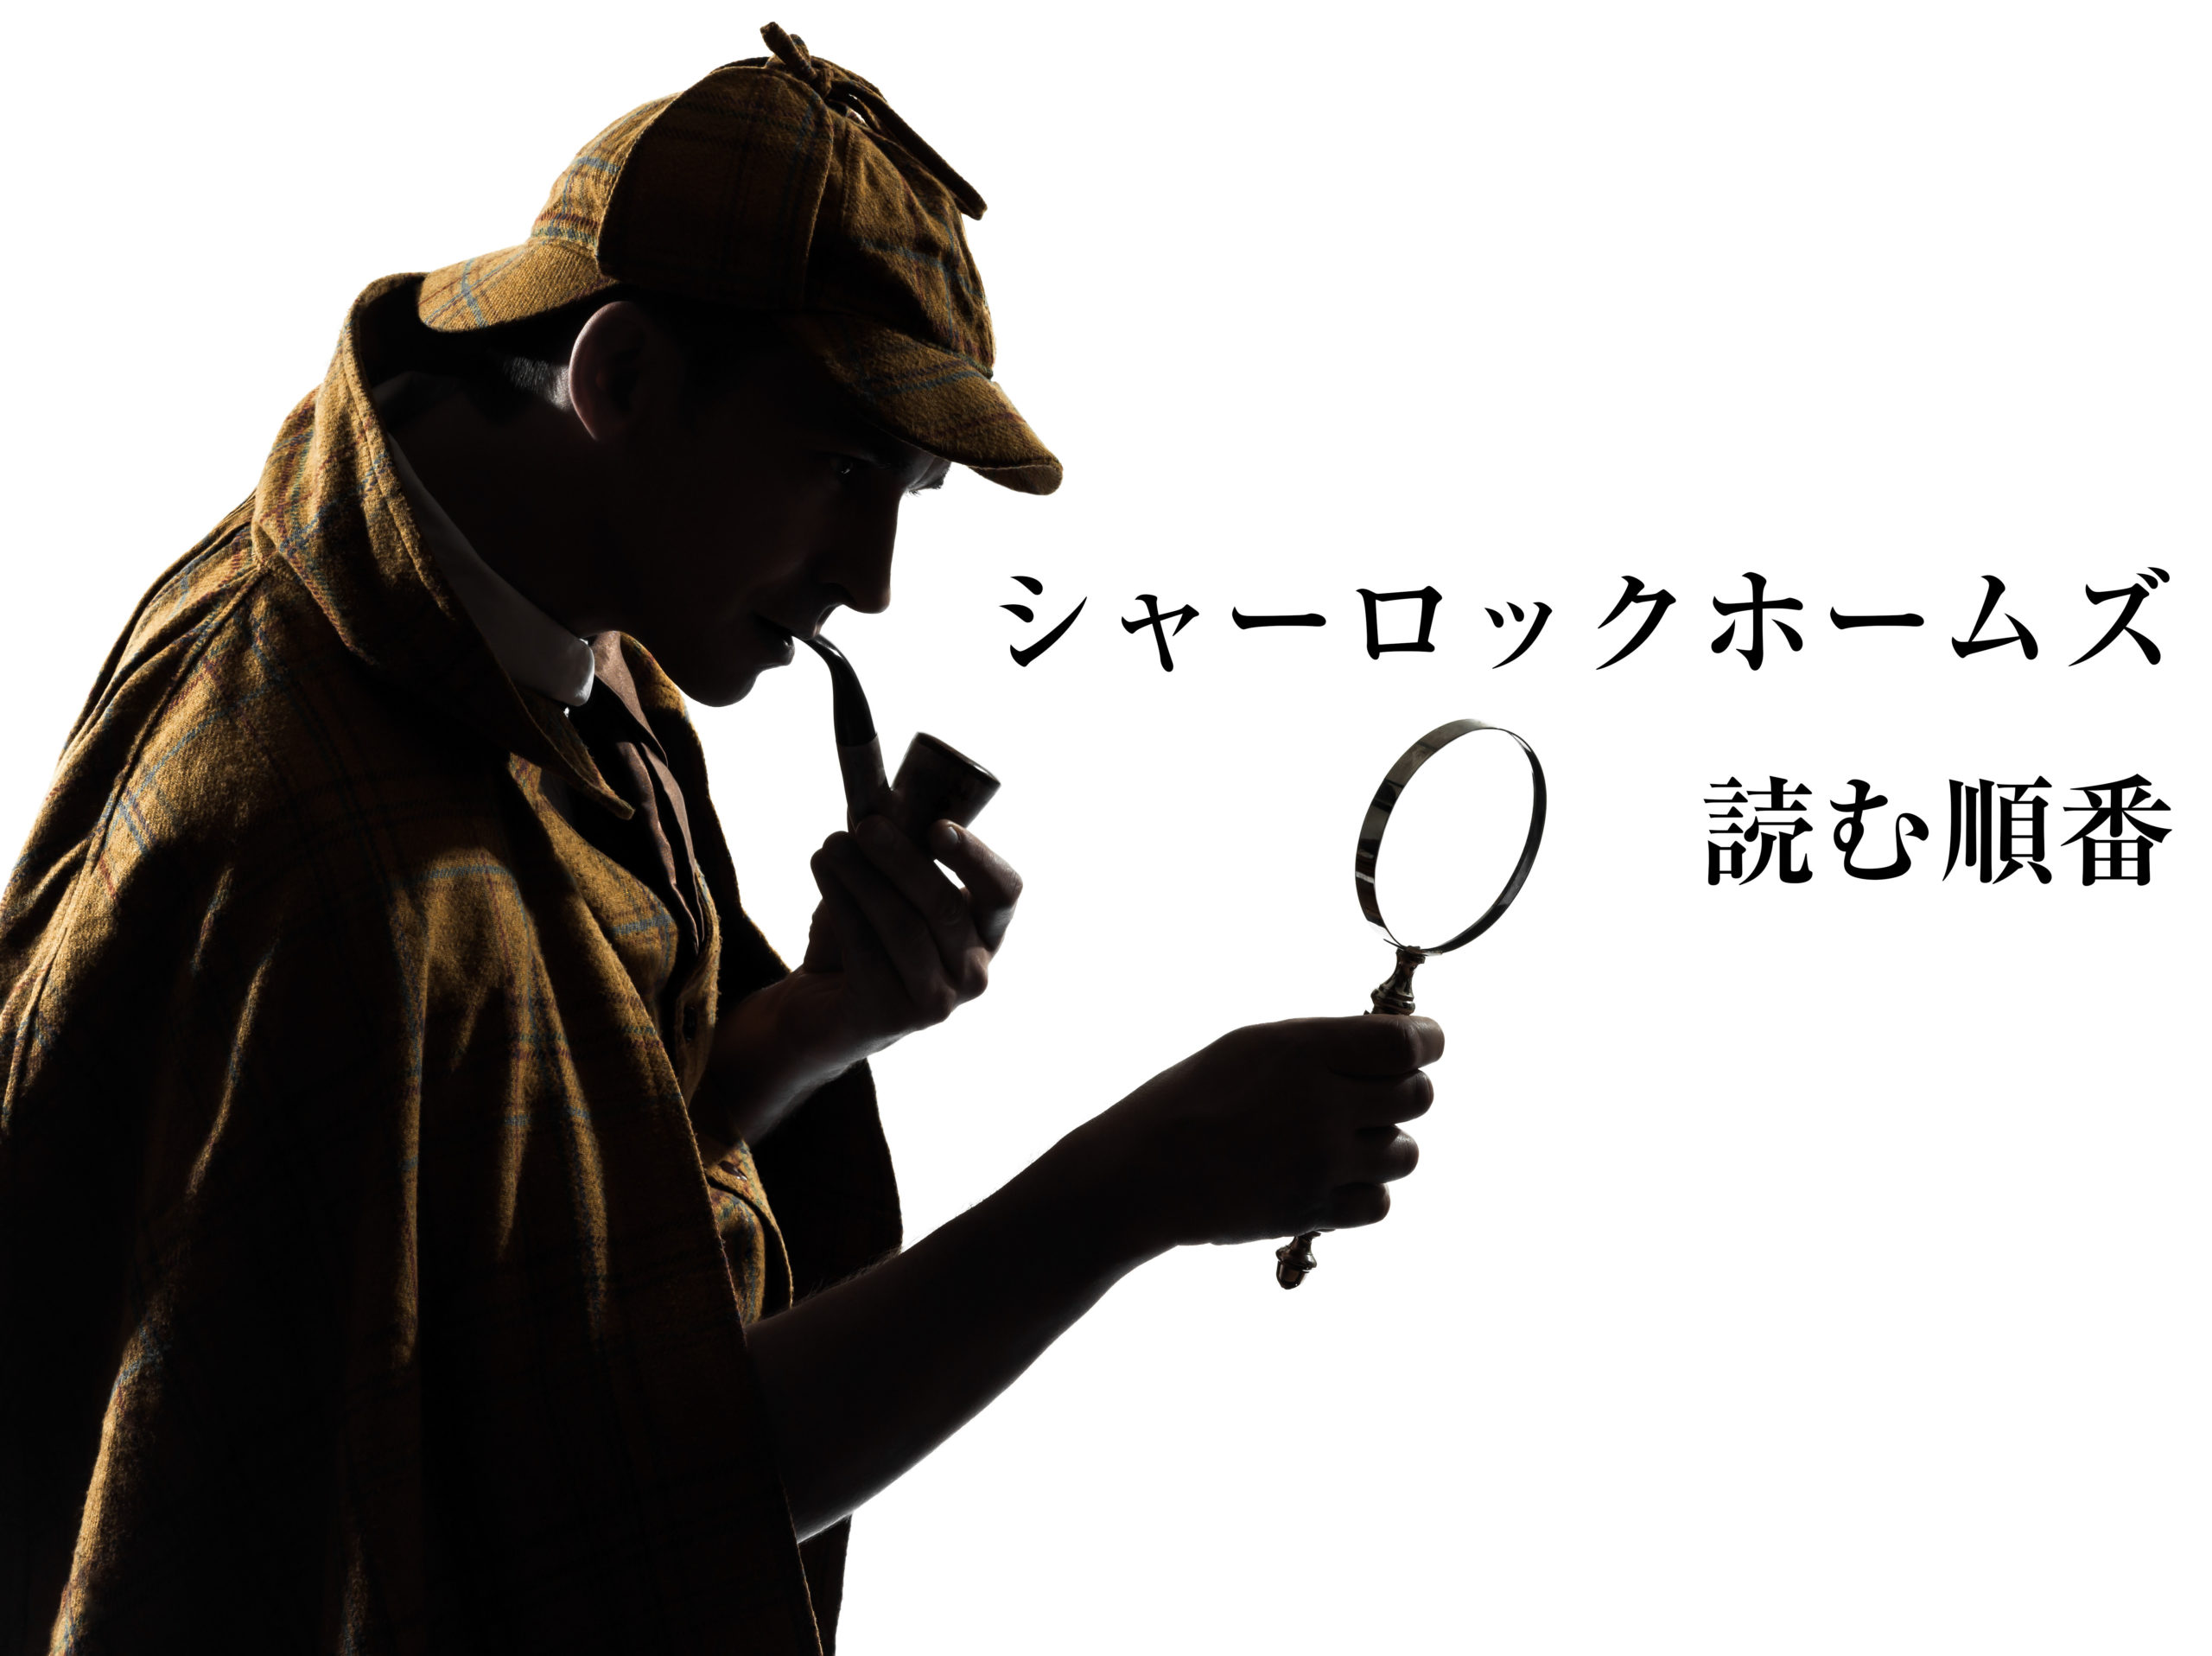 Silhouette of man smoking a cigar holding a magnifying glass